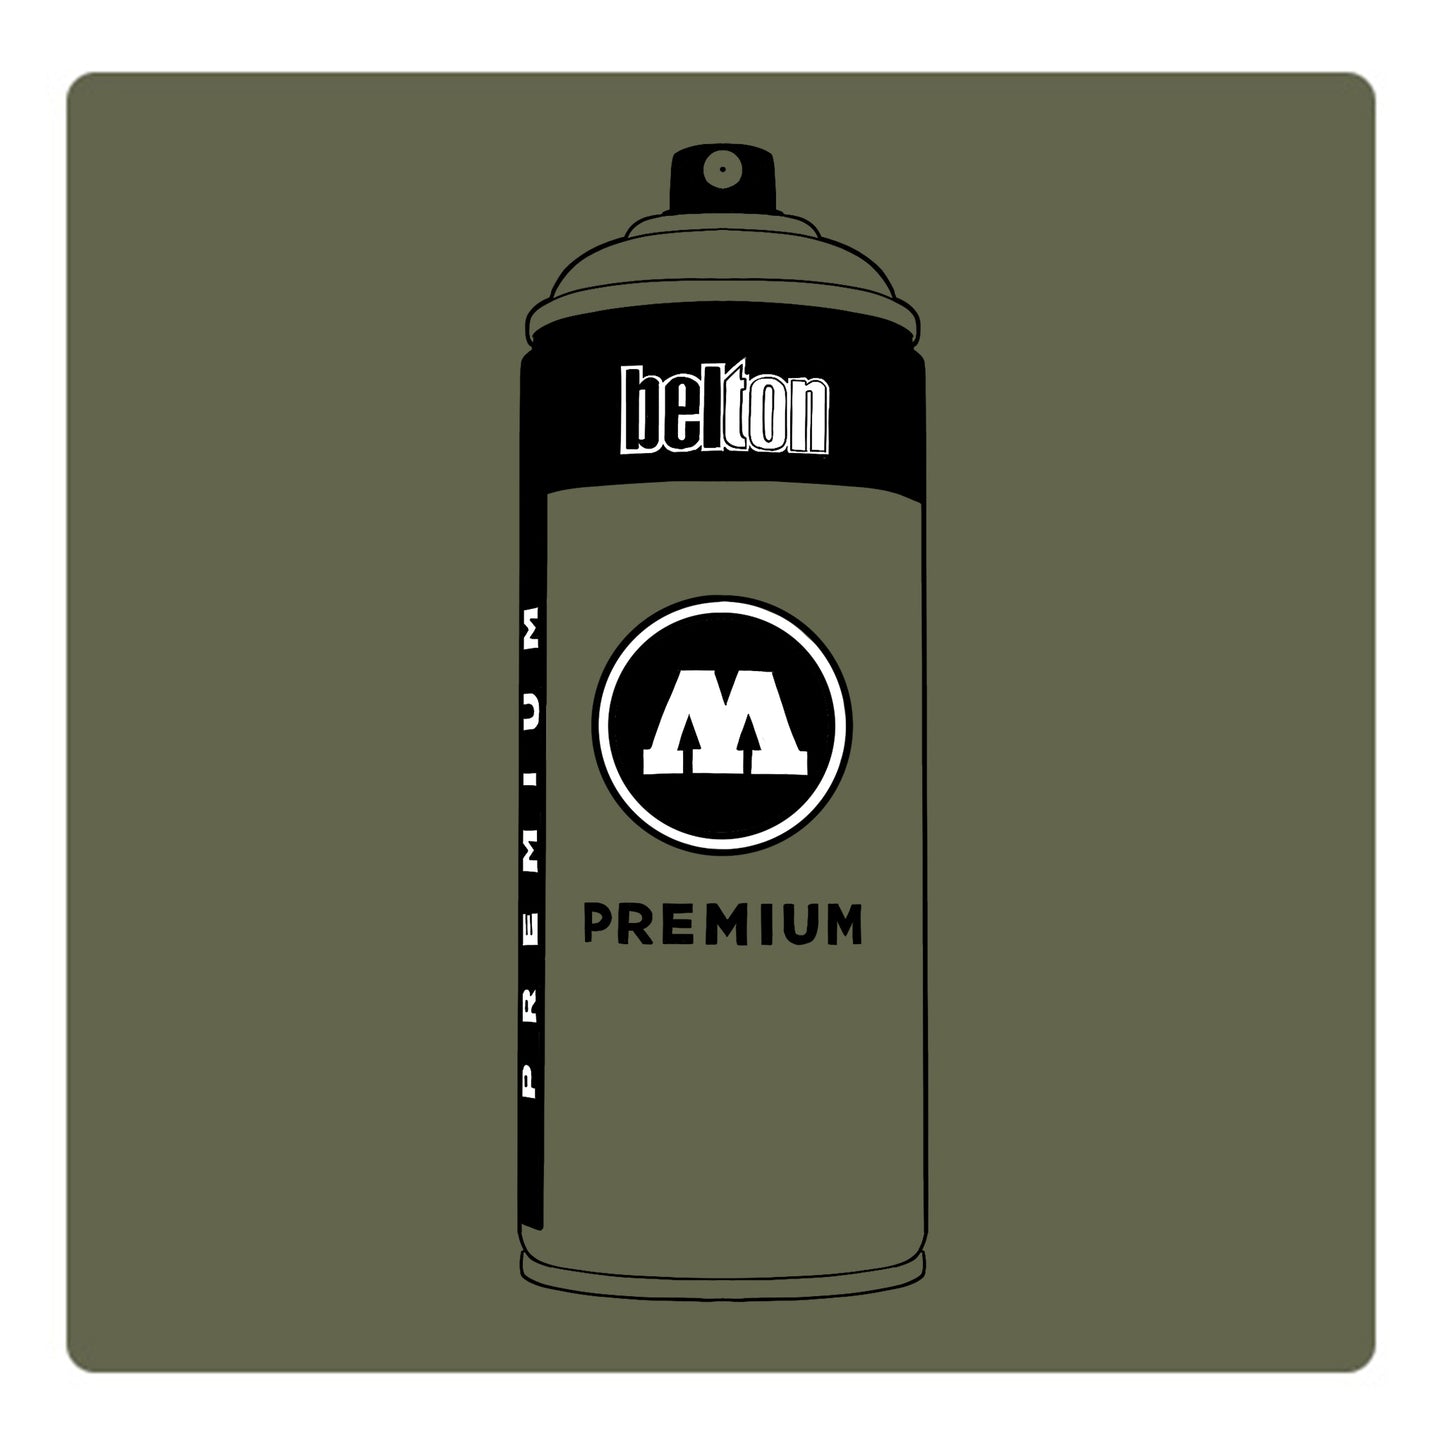 A black outline drawing of a artichoke green spray paint can with the words "belton","premium" and the letter"M" written on the face in black and white font. The background is a color swatch of the same artichoke with a white border